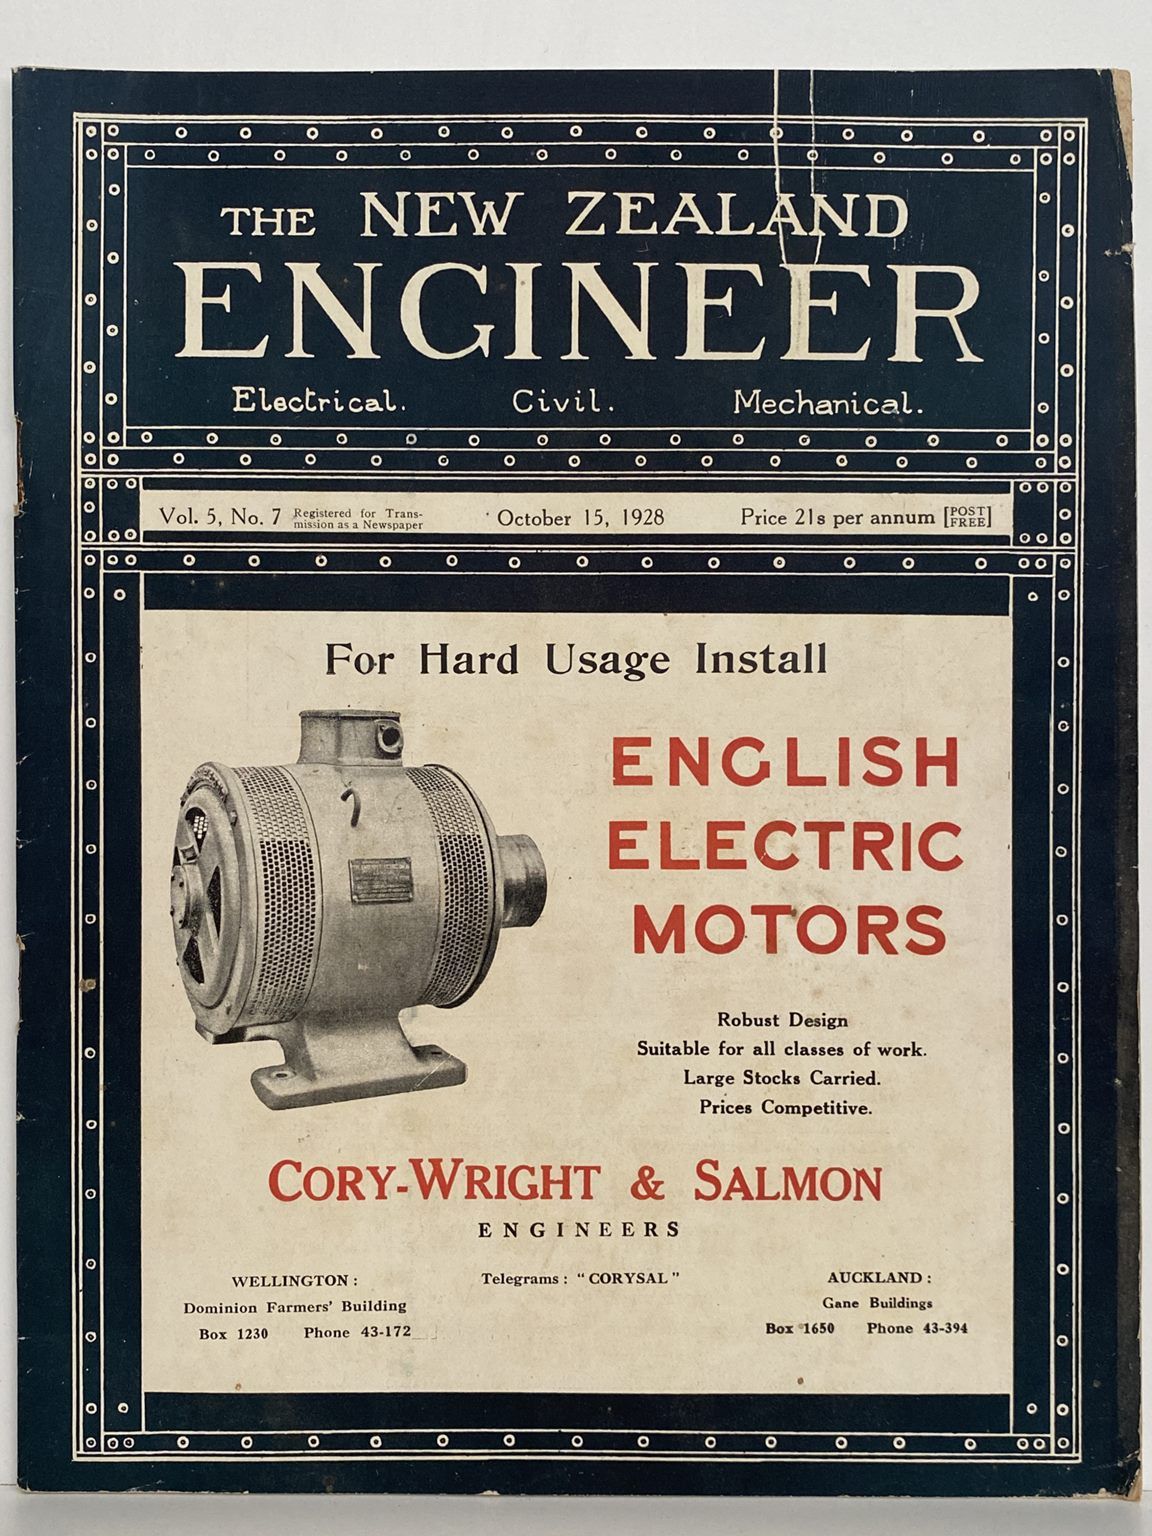 OLD MAGAZINE: The New Zealand Engineer Vol. 5, No. 7 - 15 October 1928